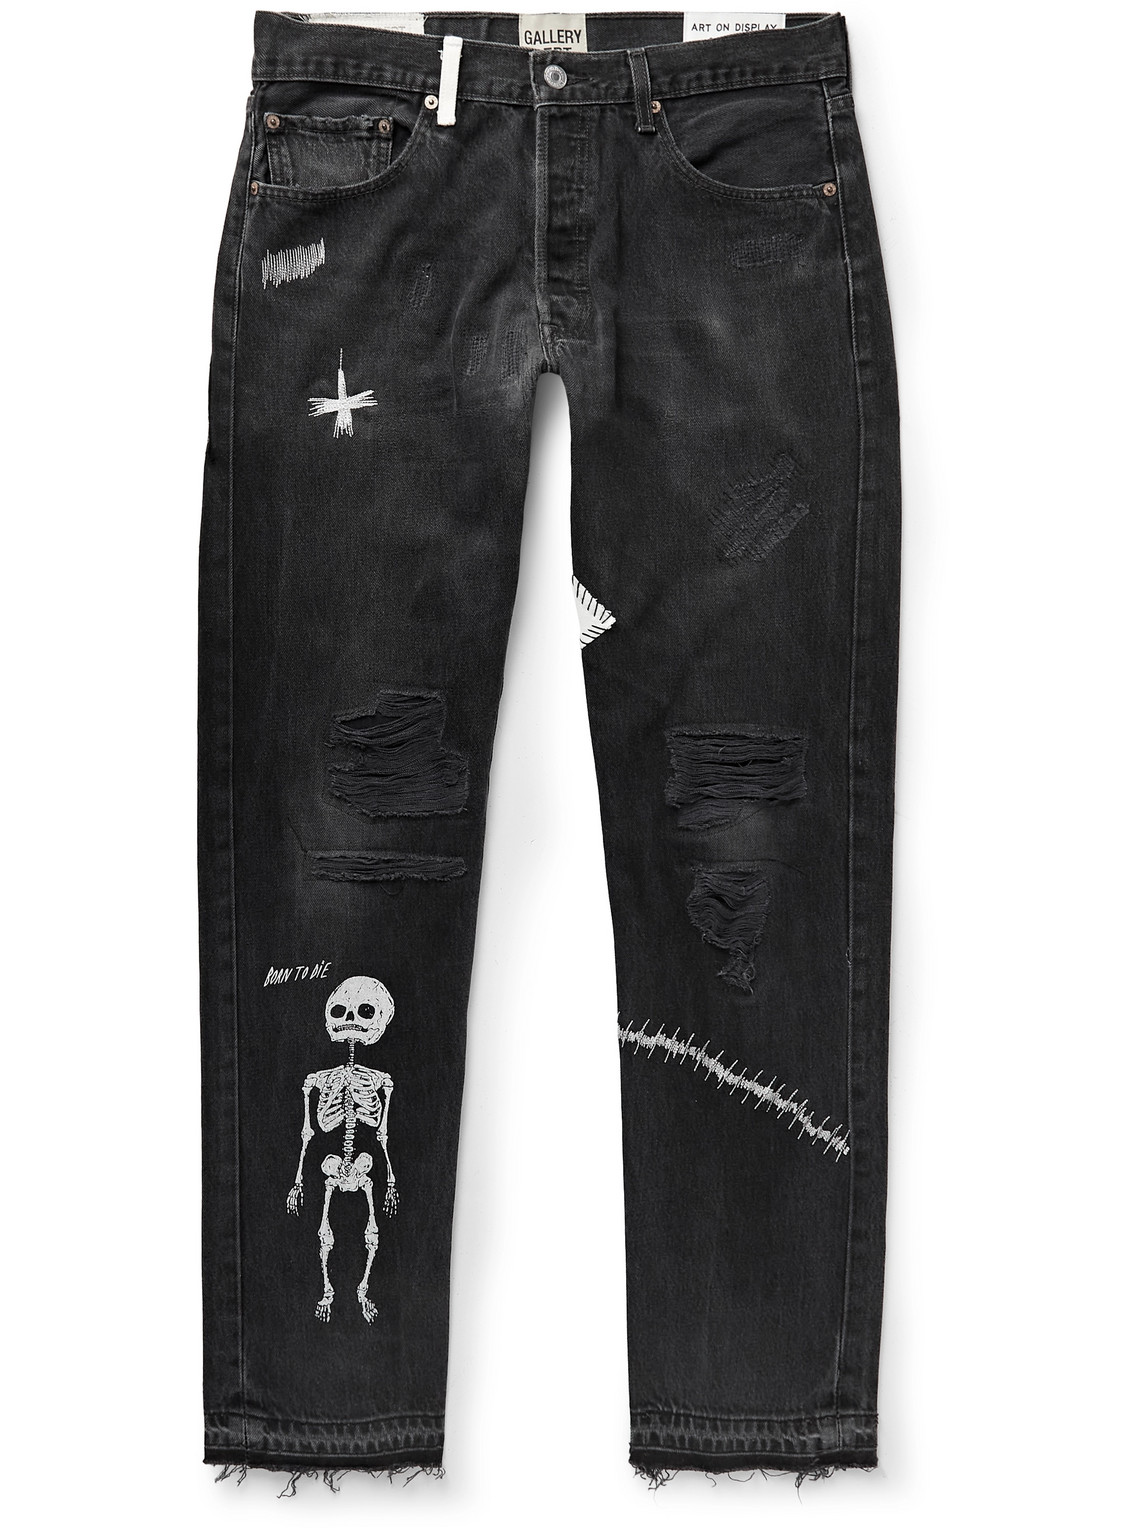 GALLERY DEPT. SLIM-FIT STRAIGHT-LEG PAINTED EMBROIDERED DISTRESSED JEANS